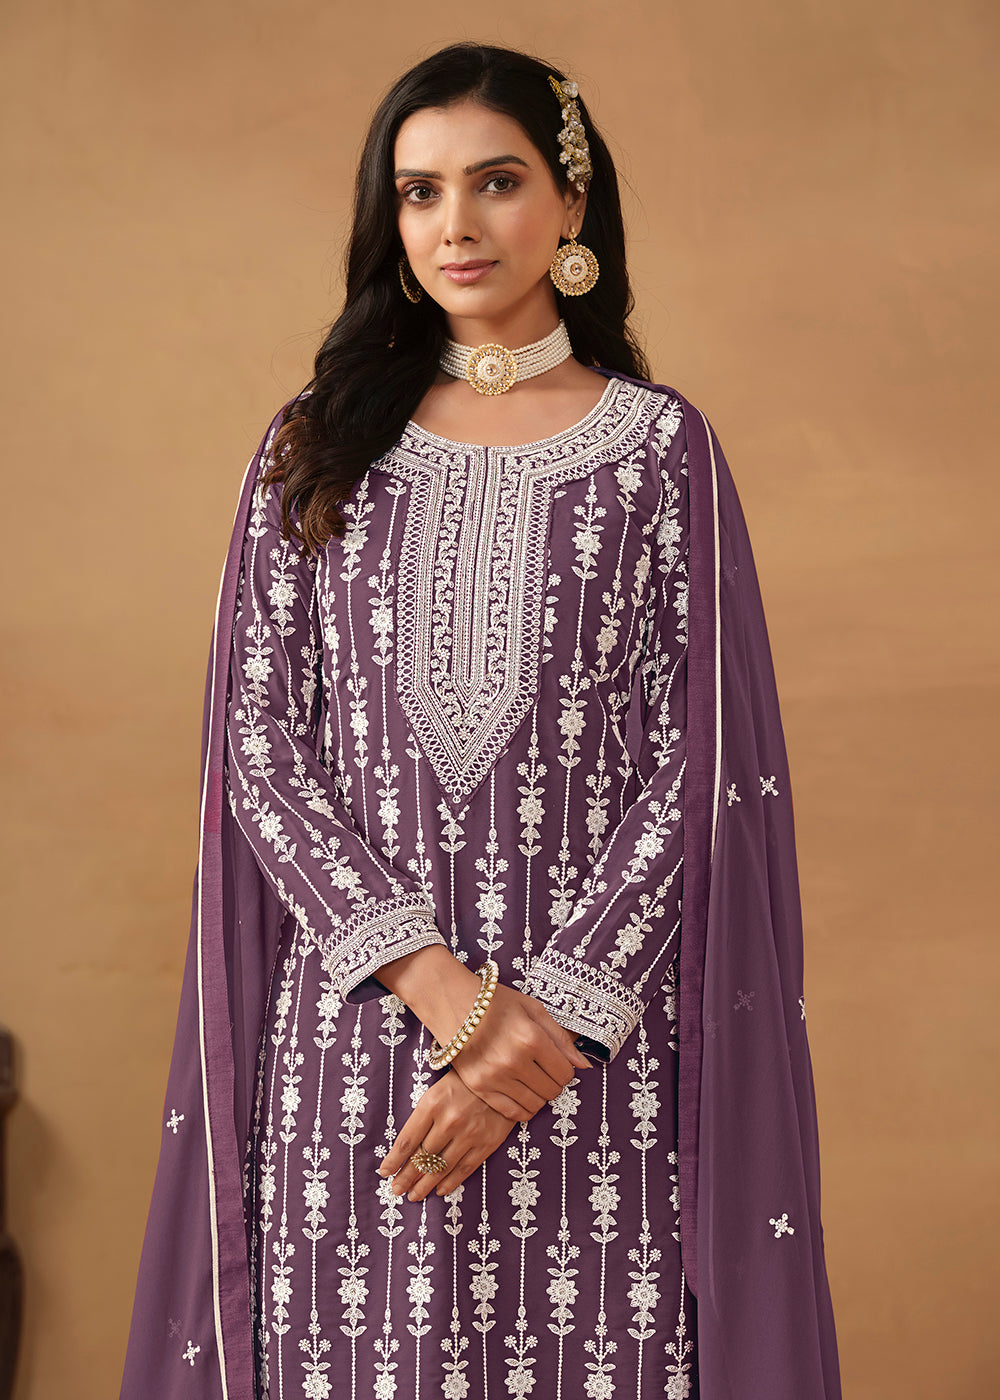 Shop Now Radiant Purple Embroidered Wedding Festive Gharara Suit Online at Empress Clothing in USA, UK, Canada, Italy & Worldwide. 